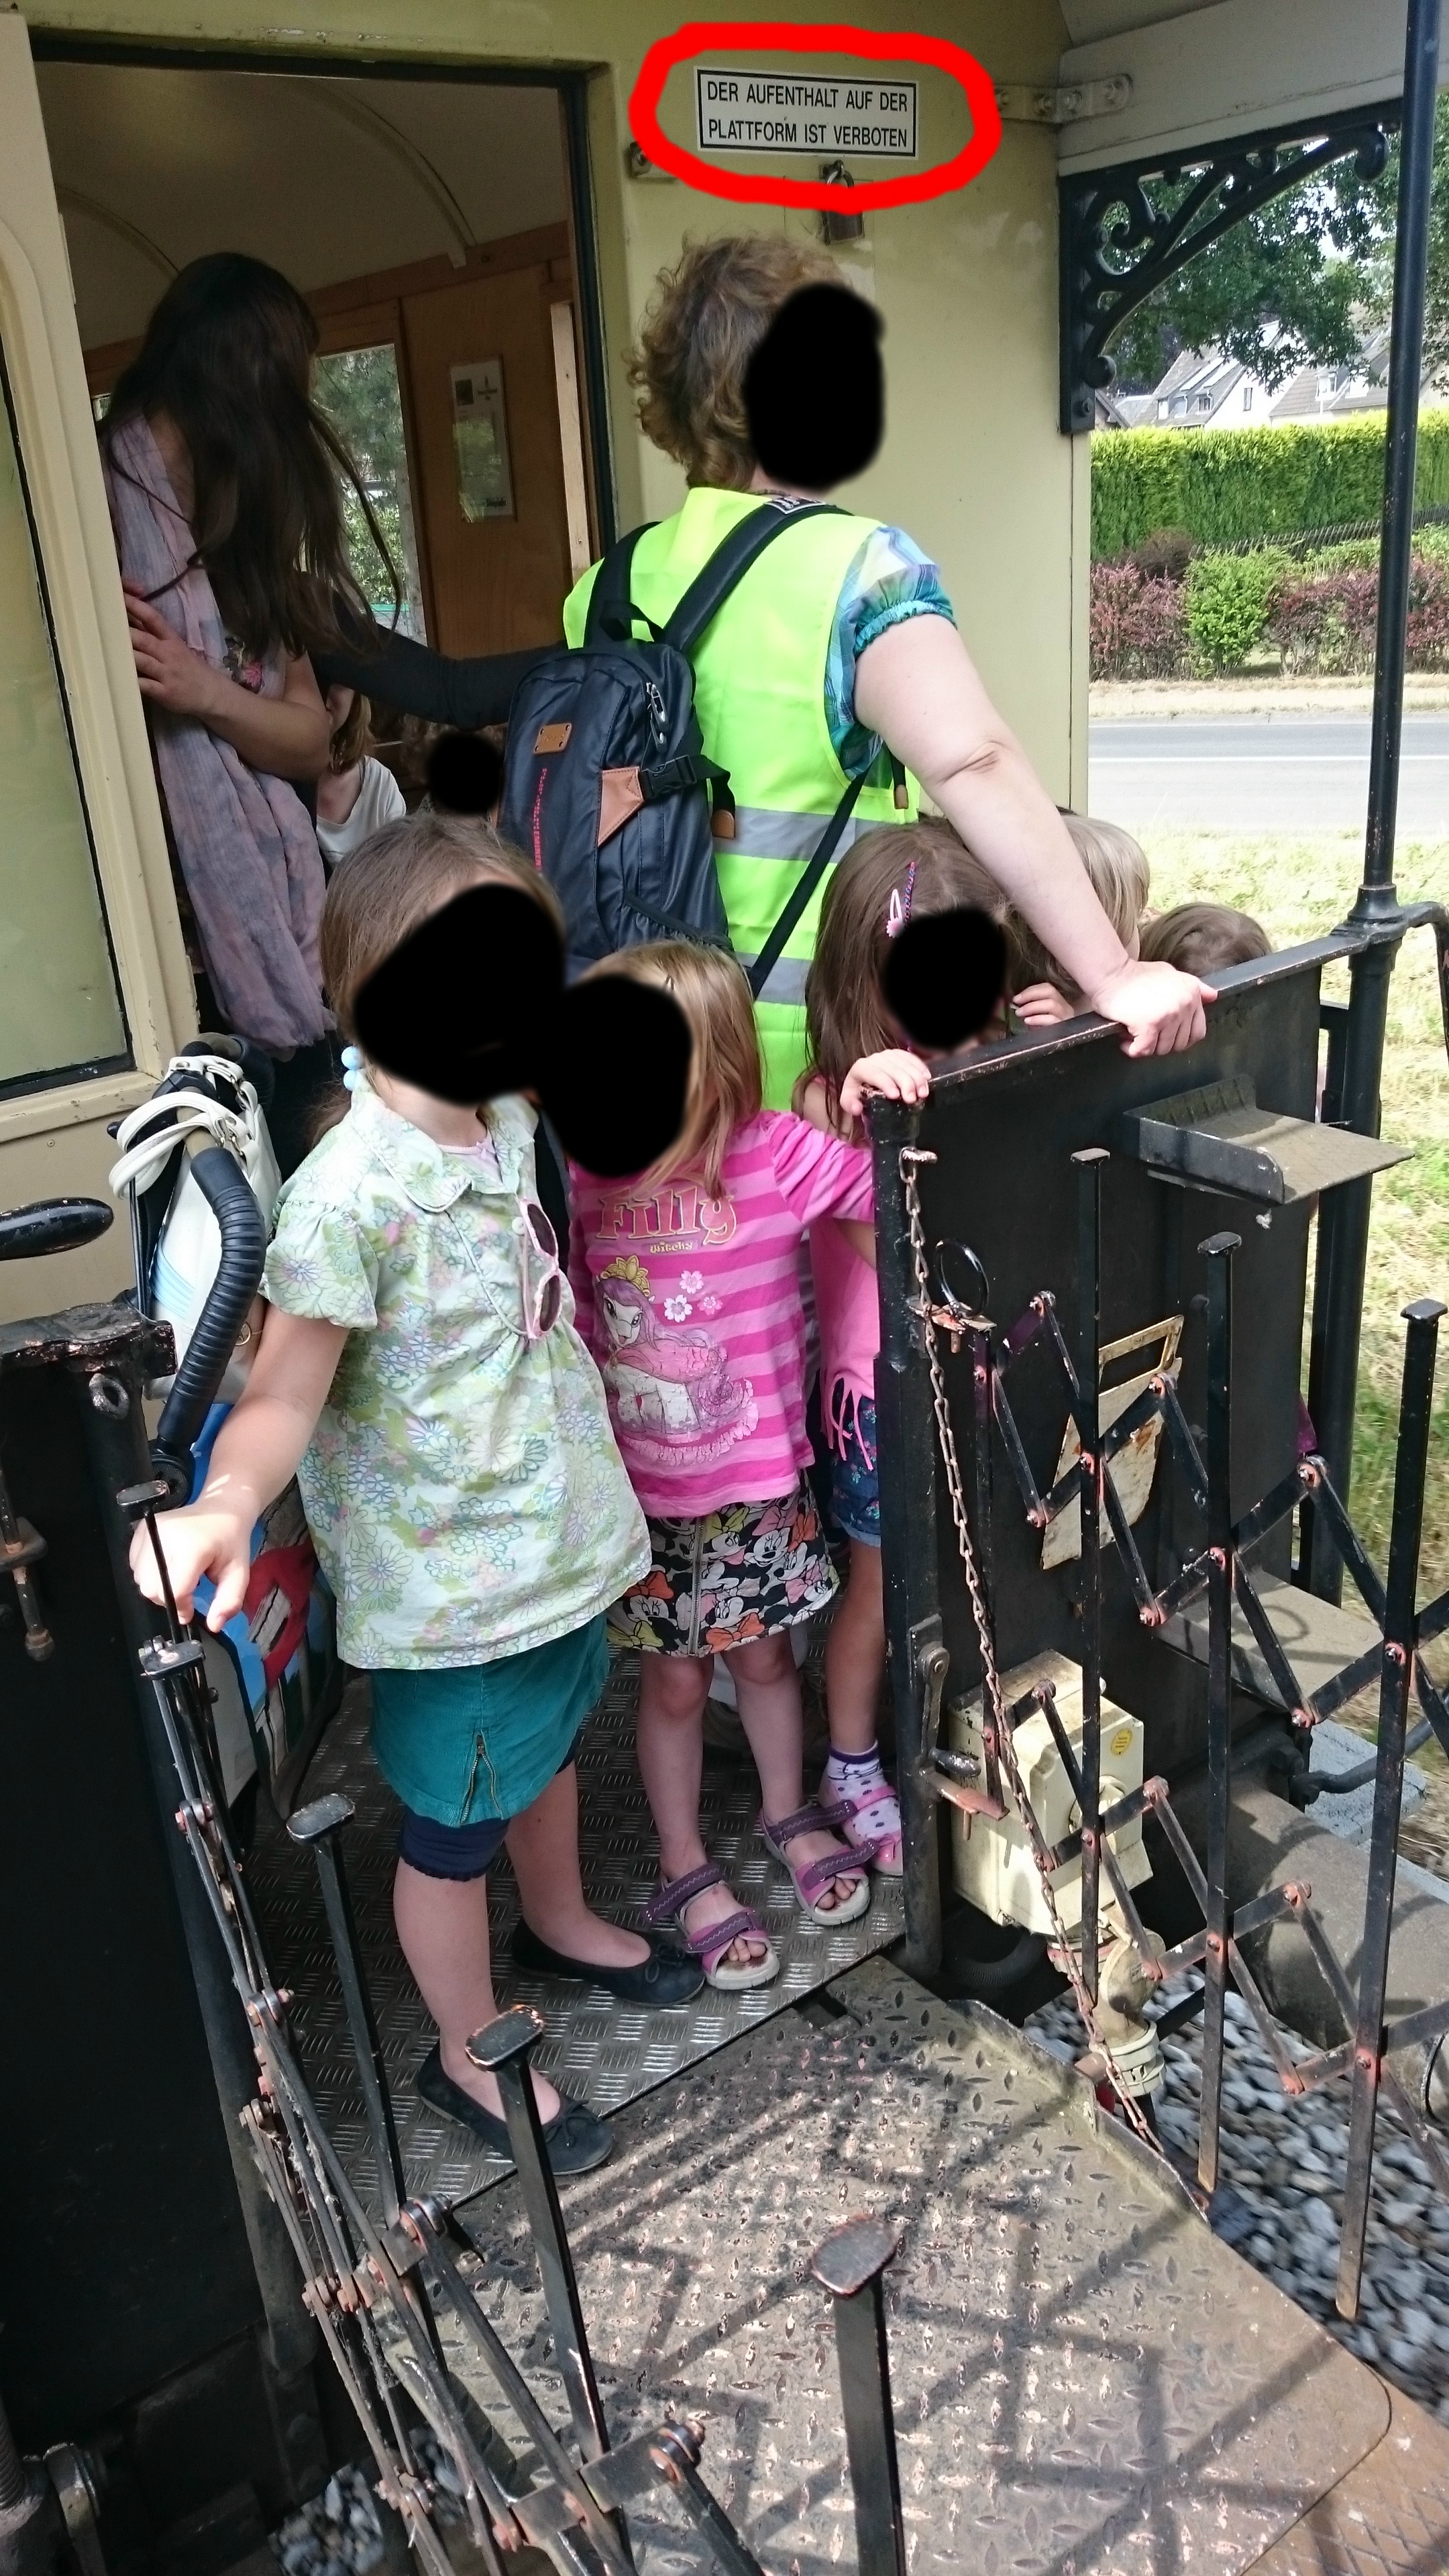 kindergarten sold more tickets than it has seats available.